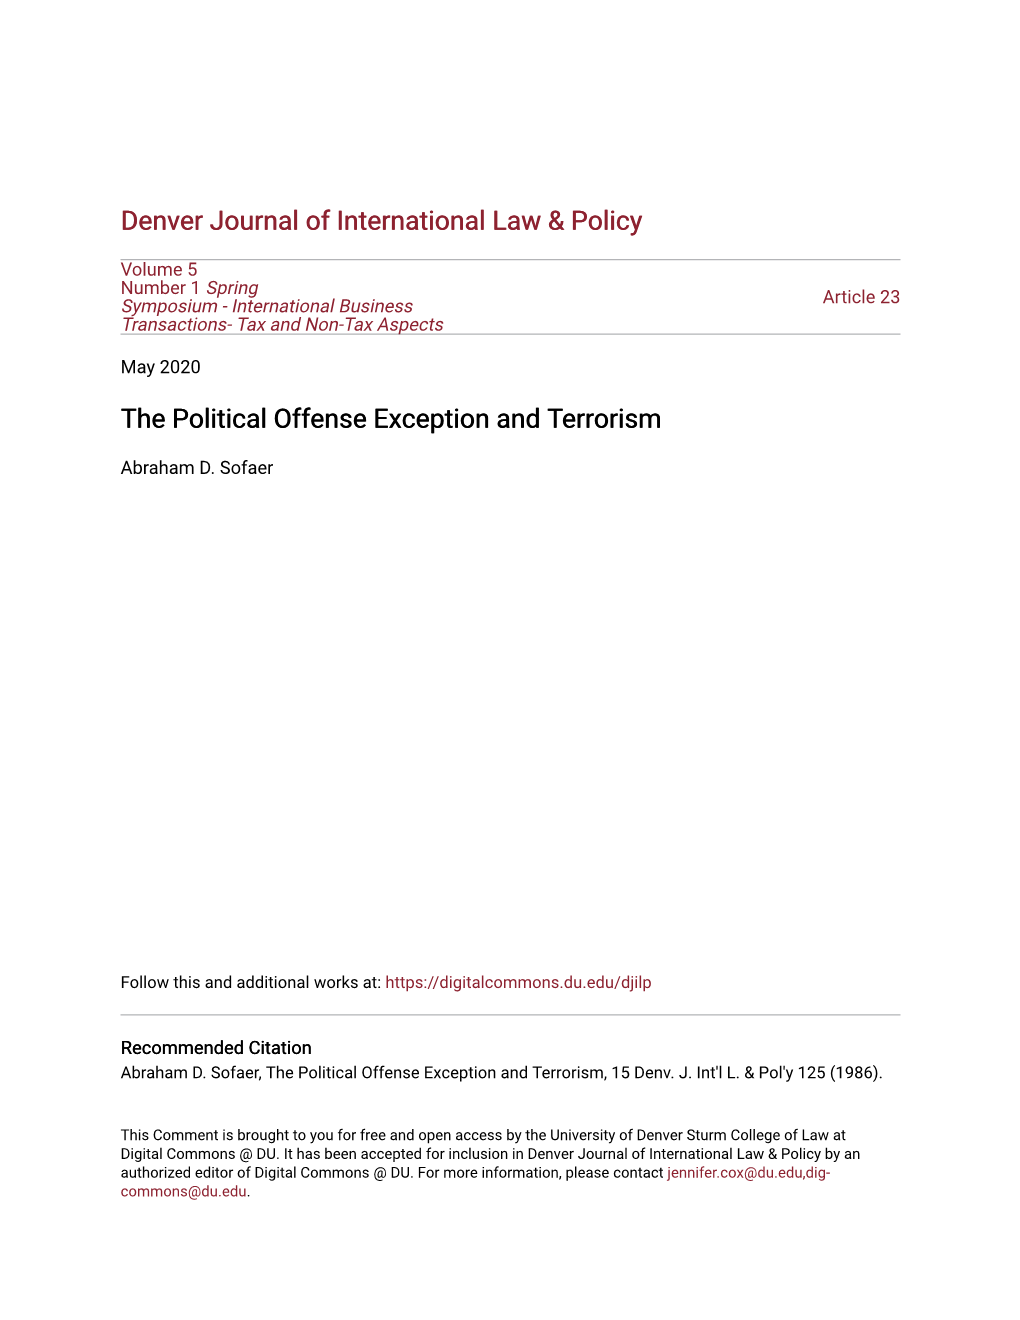 The Political Offense Exception and Terrorism